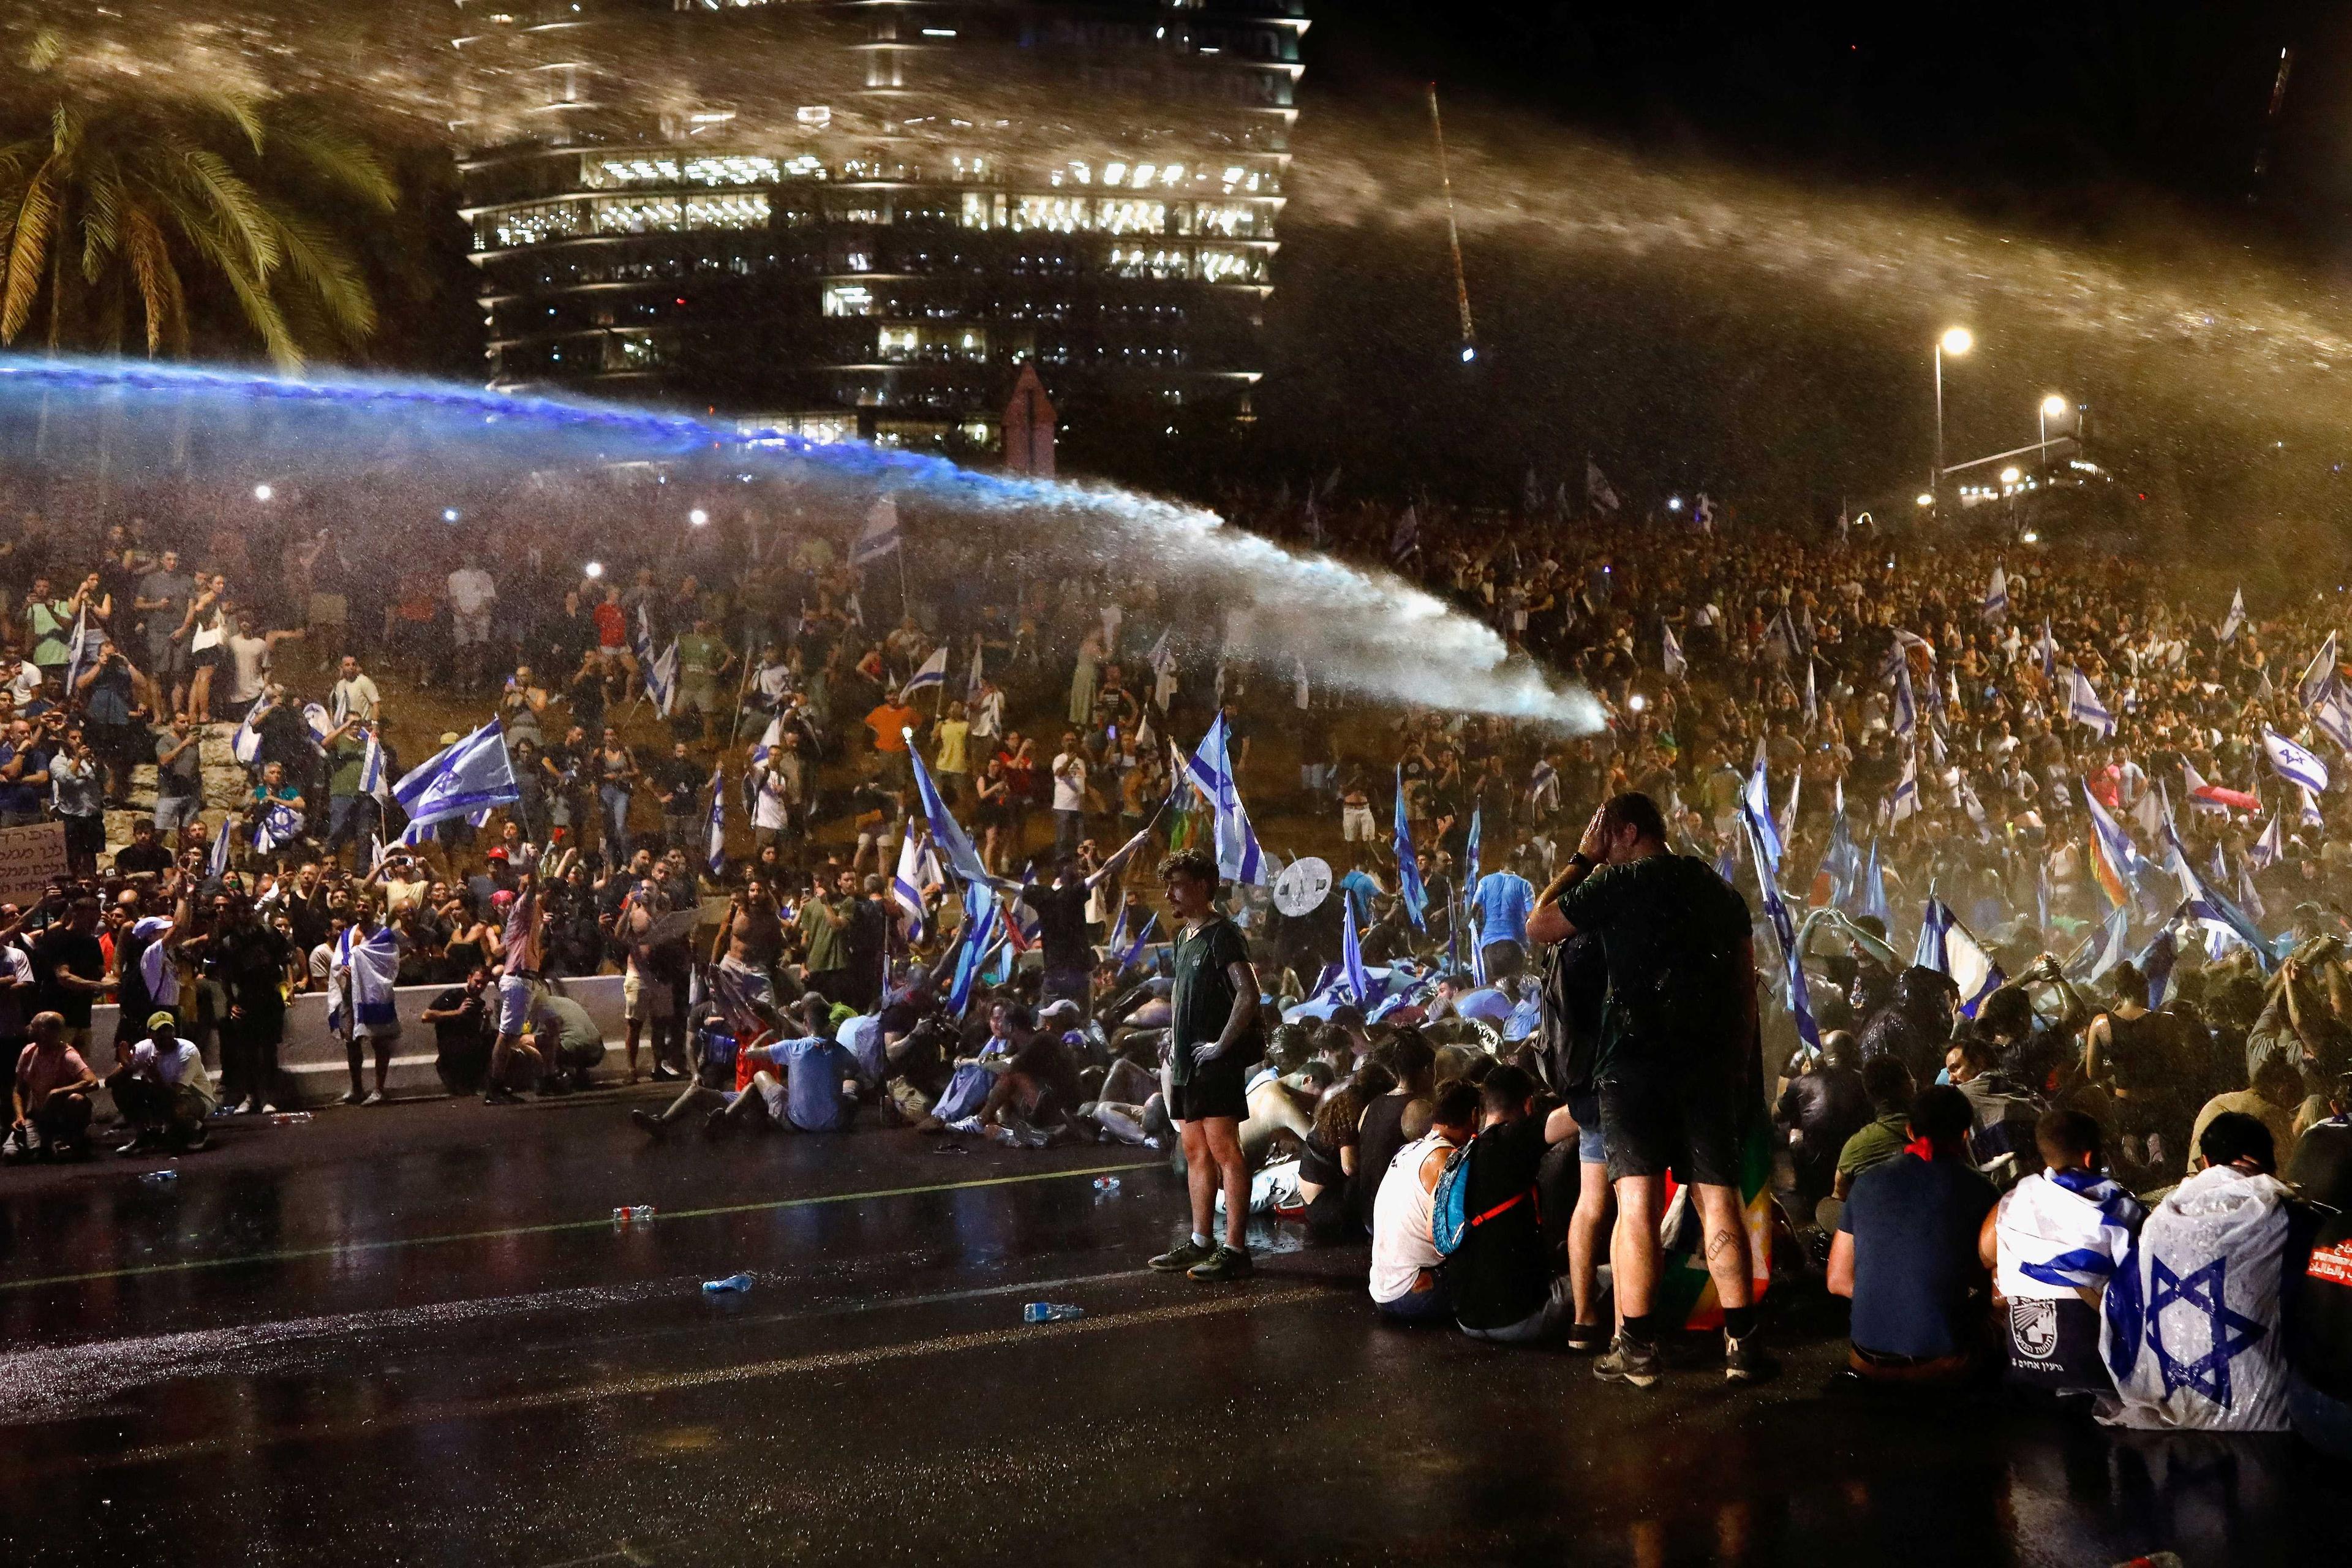 Police use water cannon as protesters block Ayalon Highway during a demonstration following a parliament vote on a contested bill that limits Supreme Court powers to void some government decisions, in Tel Aviv, Israel July 24. Photo: Reuters